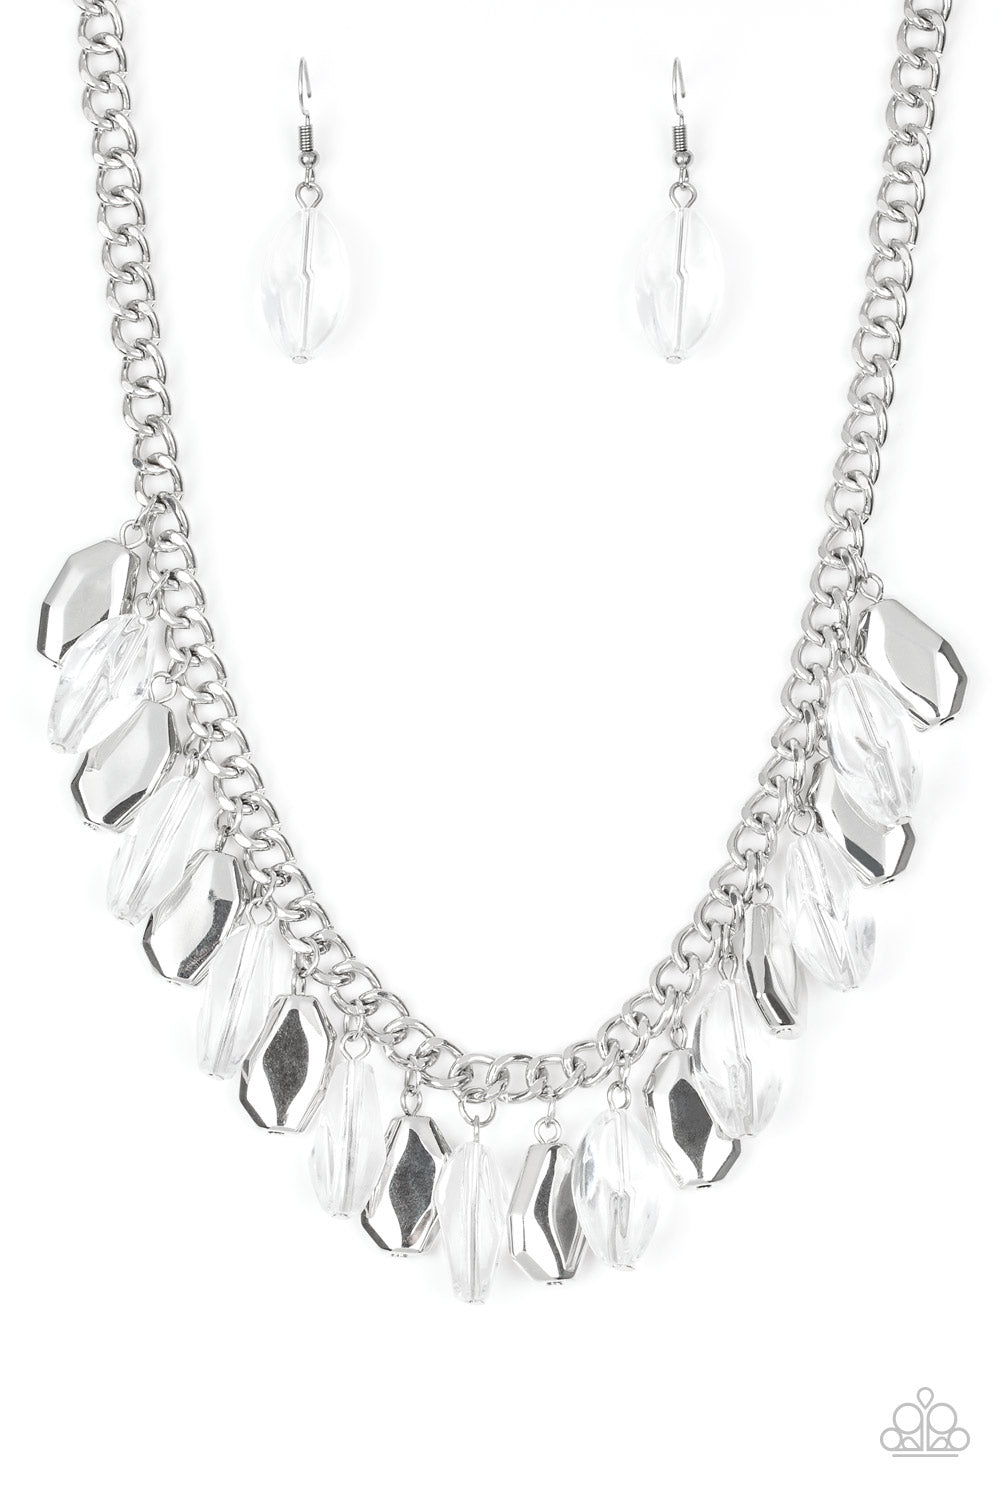 Faceted translucent beads and imperfect silver teardrops drip from the bottom of a shimmery silver chain, creating a sassy fringe below the collar. Features an adjustable clasp closure.